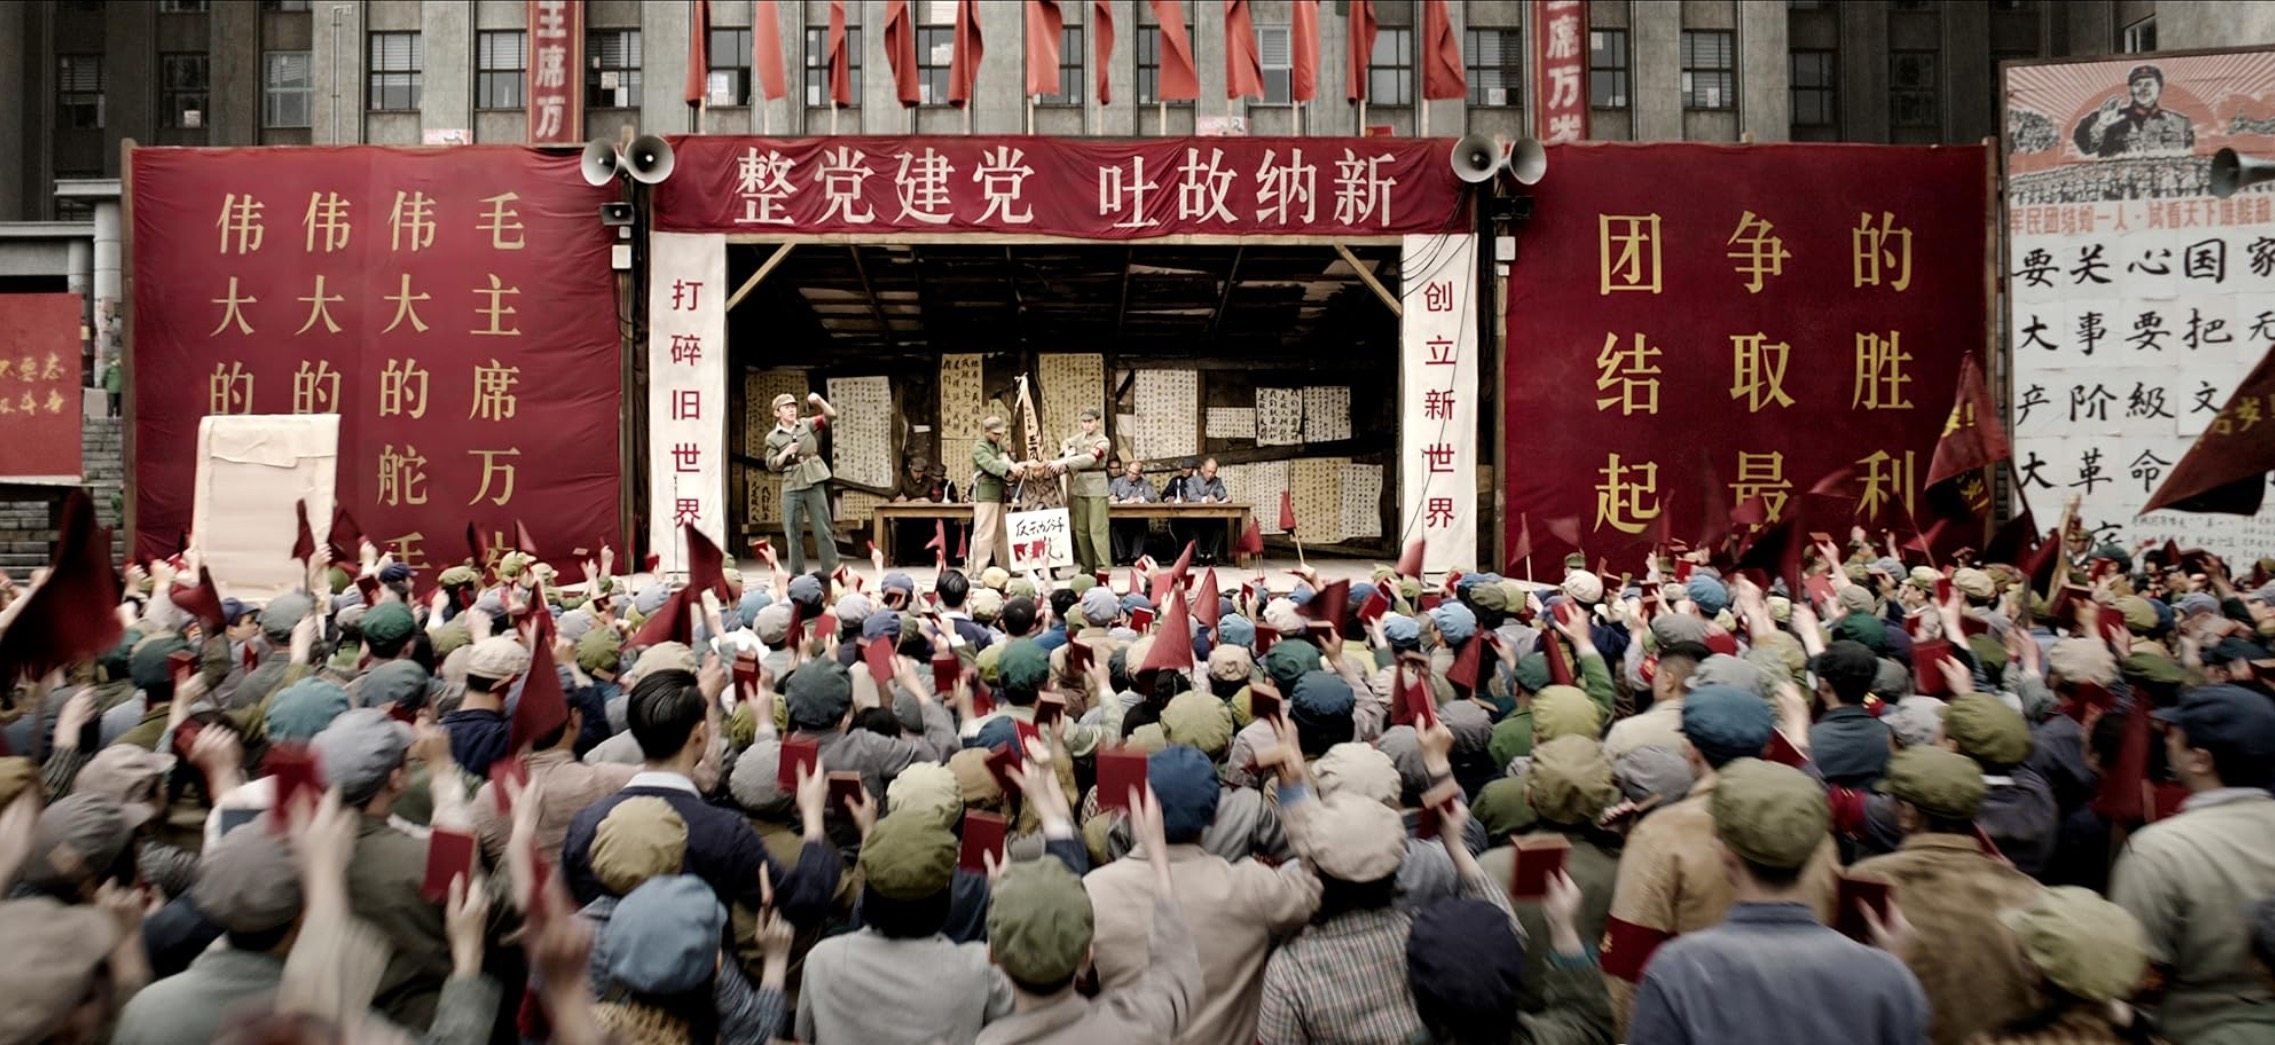 While some Chinese viewers praised the Netflix series’ detailed depiction of the Cultural Revolution, others said it painted China in a bad light and portrayed non-Chinese characters as saviours. Photo: Netflix